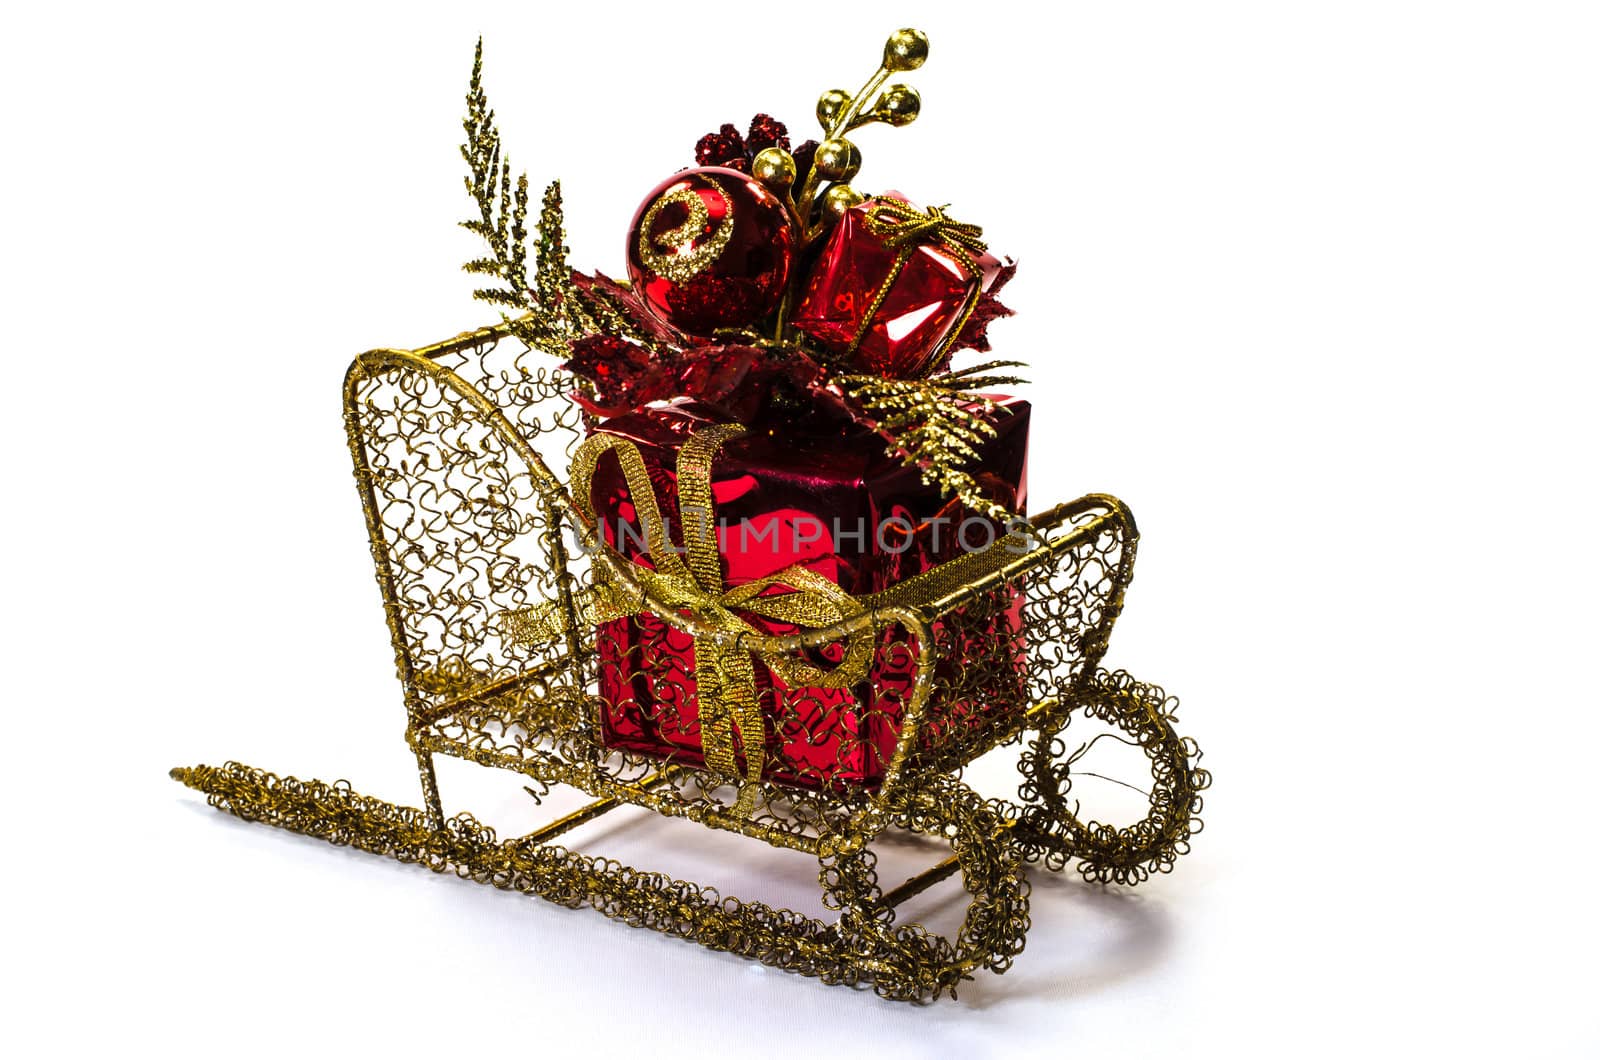 Christmas Gift on Sleigh by dehooks